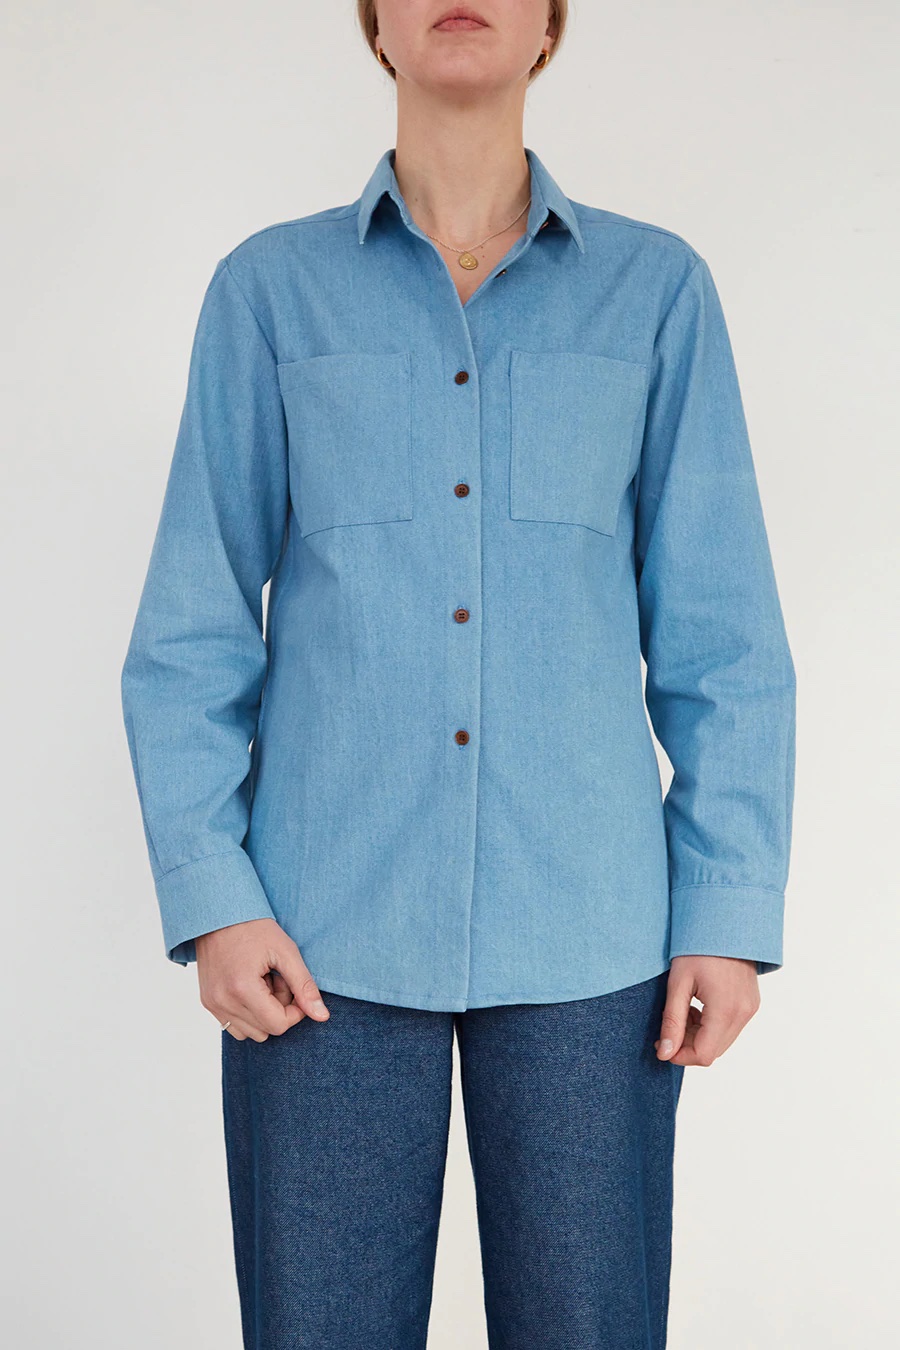 Woman wearing the Unisex Shirt sewing pattern from The Modern Sewing Co on The Fold Line. A shirt pattern made in poplin, lightweight twill or denim fabrics, featuring a boxy silhouette, collar and stand, front button closure, chest patch pockets, full length sleeves with button cuffs, back yoke with pleat and tab and high/low hem.